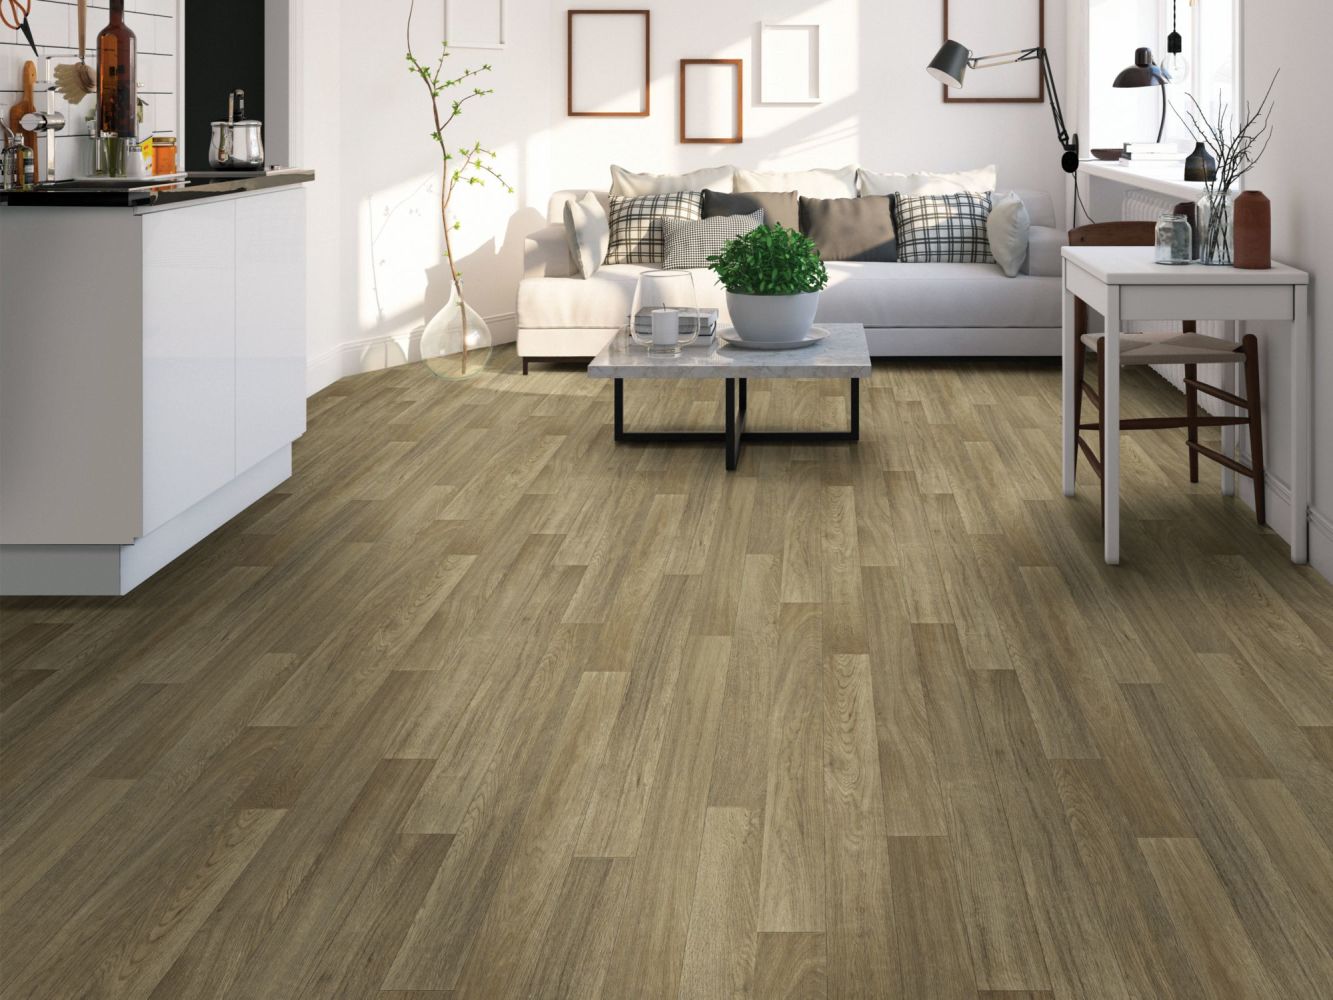 Shaw Floors Resilient Residential Natural Luxe  55g Grant 00145_VG089